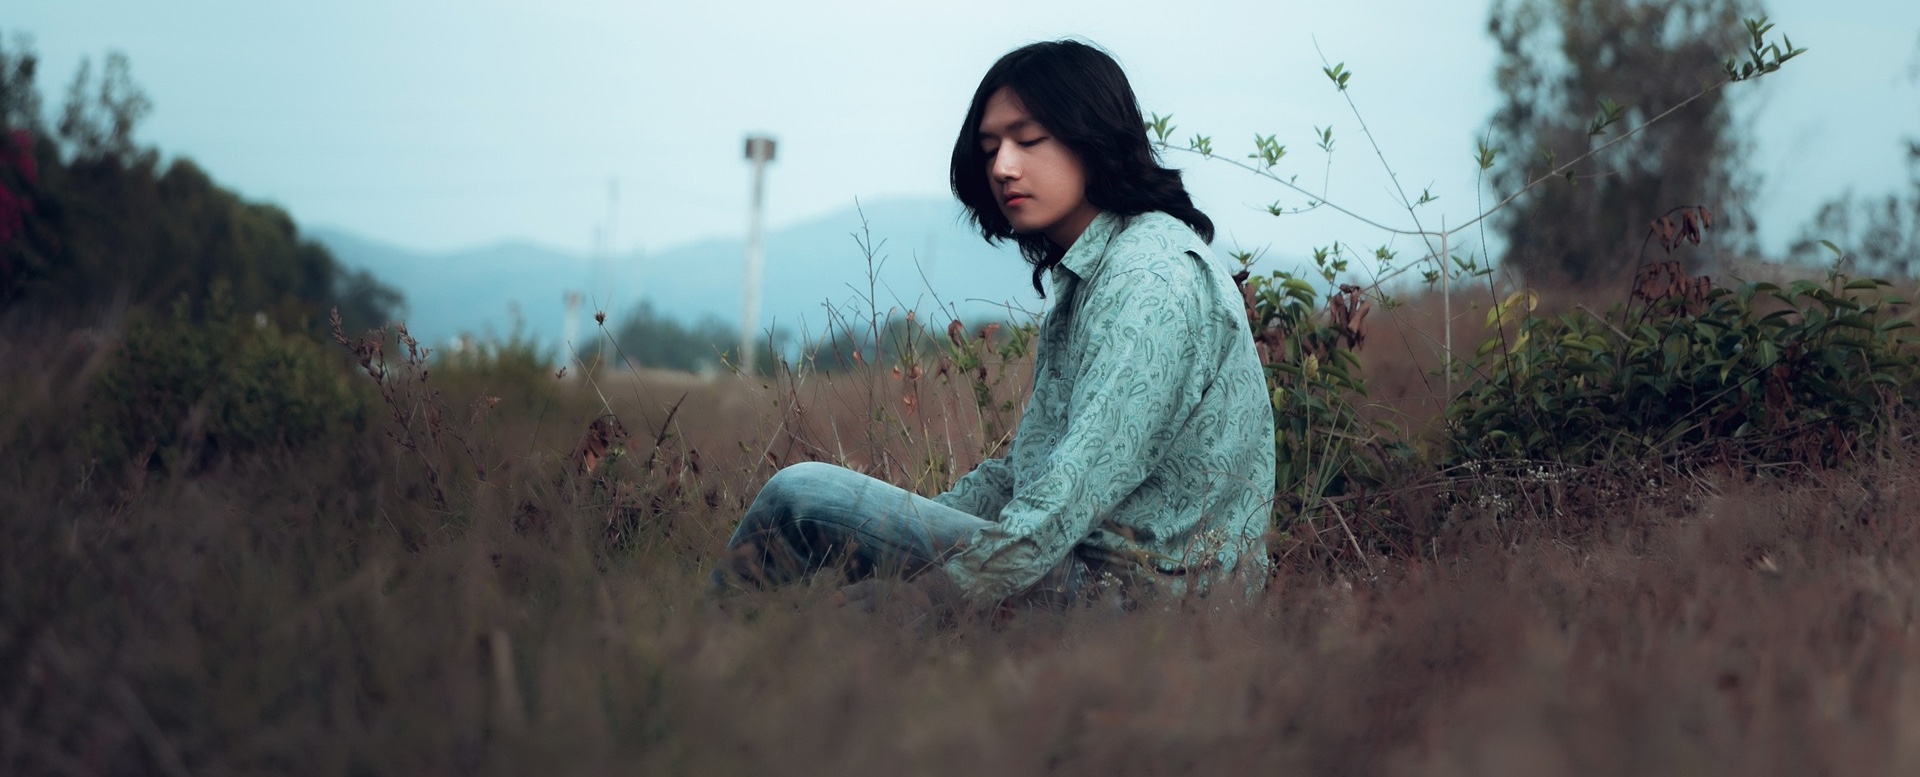 Young man with shoulder-length hair sitting quietly in a grassland